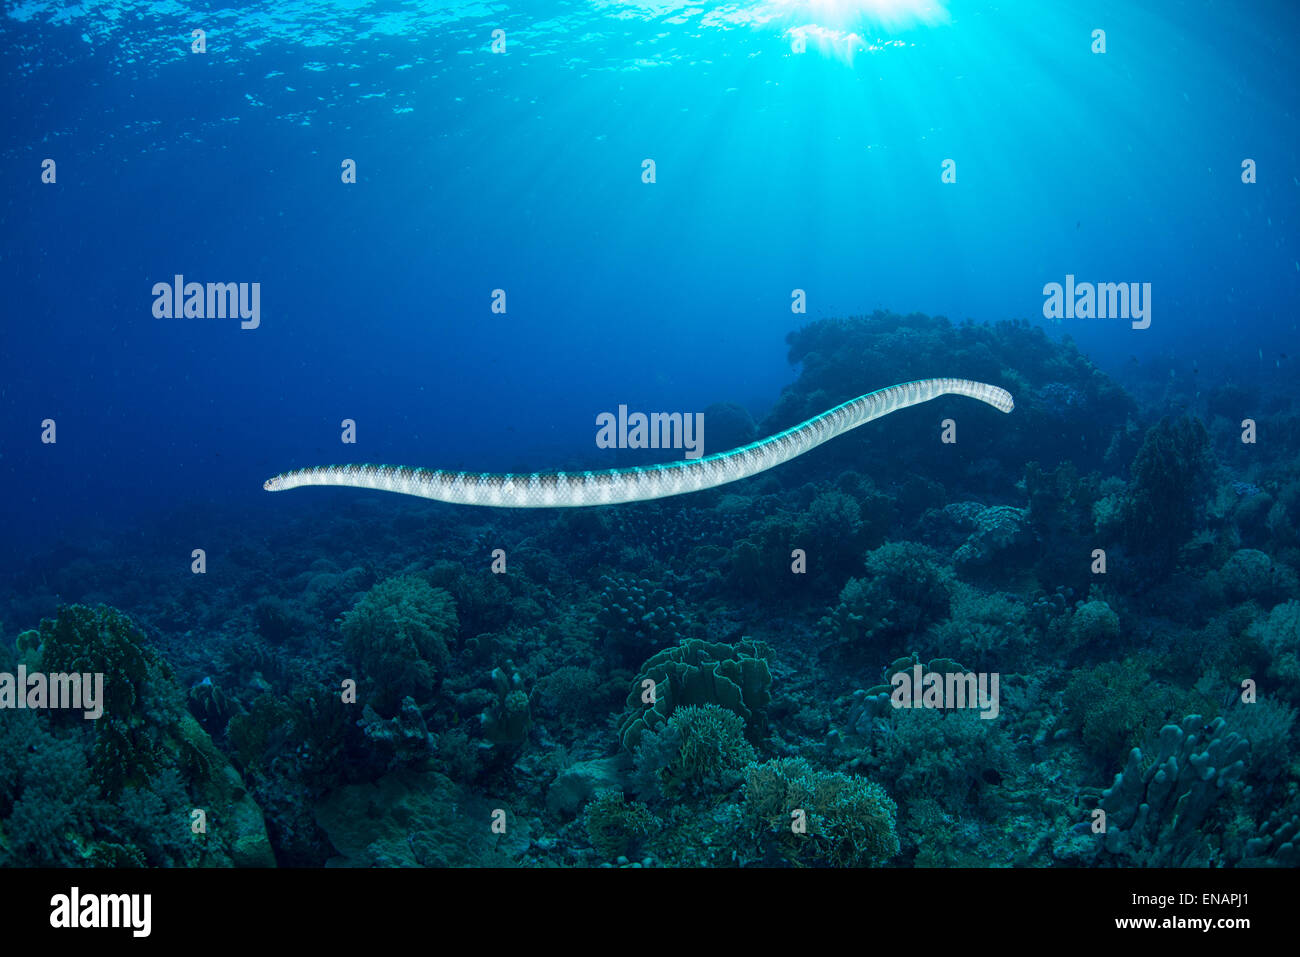 A poisonous sea snake swims horizontally just above the top reef and gives a nice vie of its body and tail Stock Photo